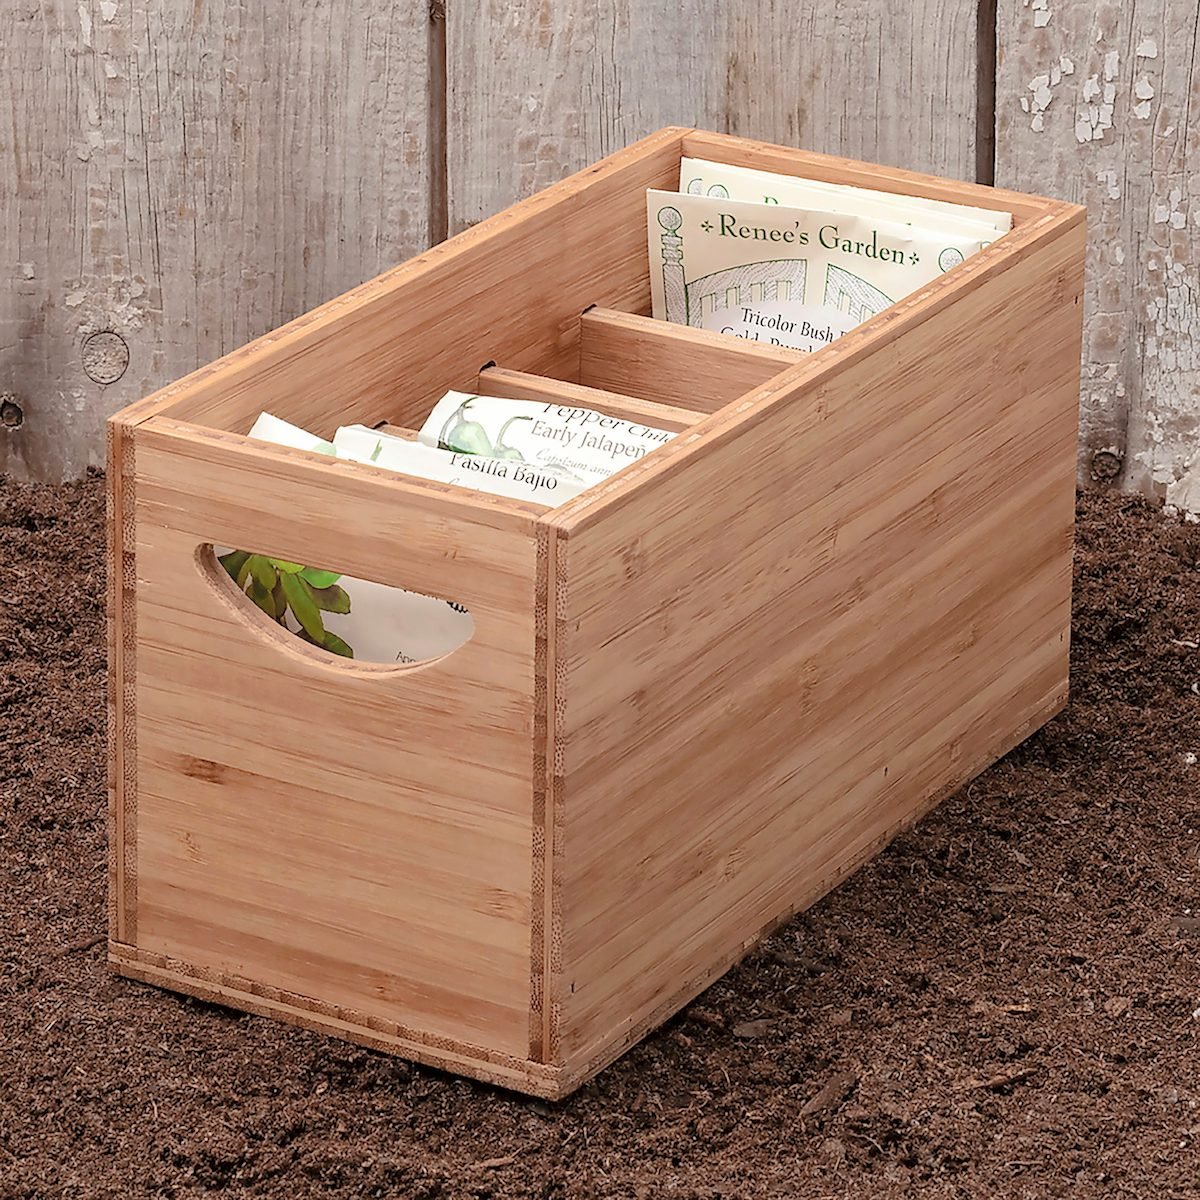 5 Useful Seed Storage Boxes and Garden Containers - Birds and Blooms